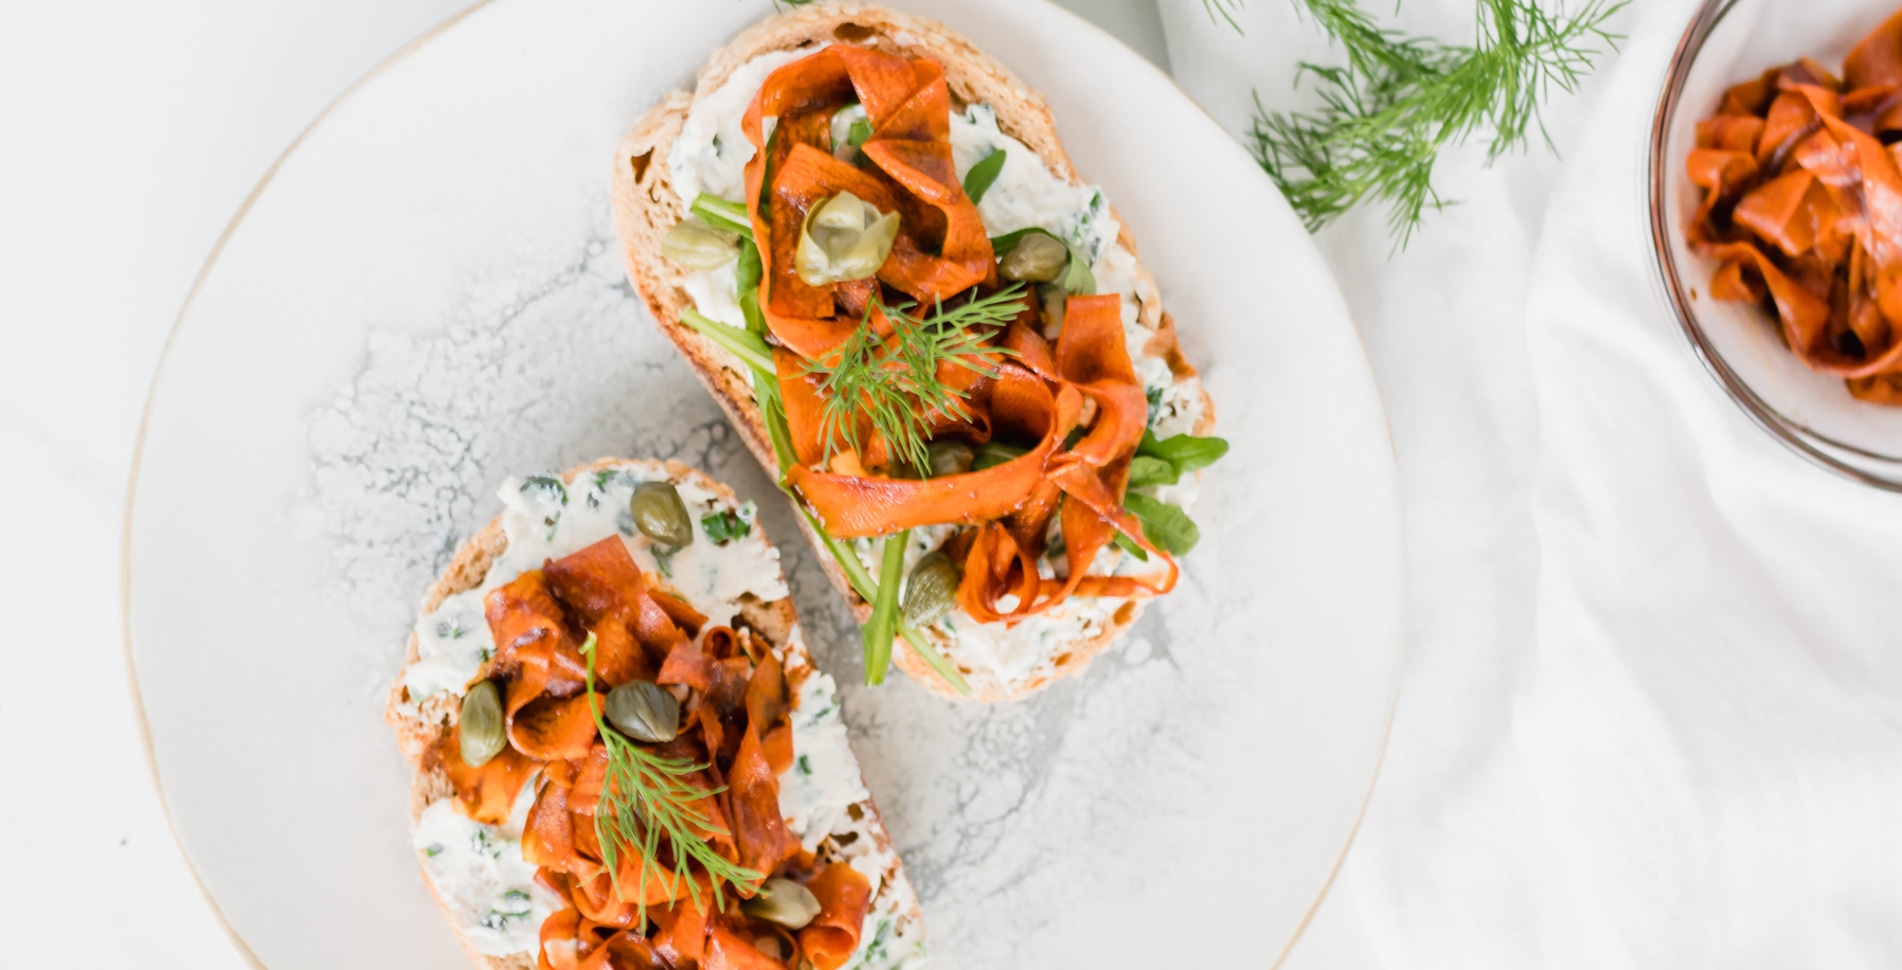 Vegan Carrot Lox Toast With Herbed Cheese